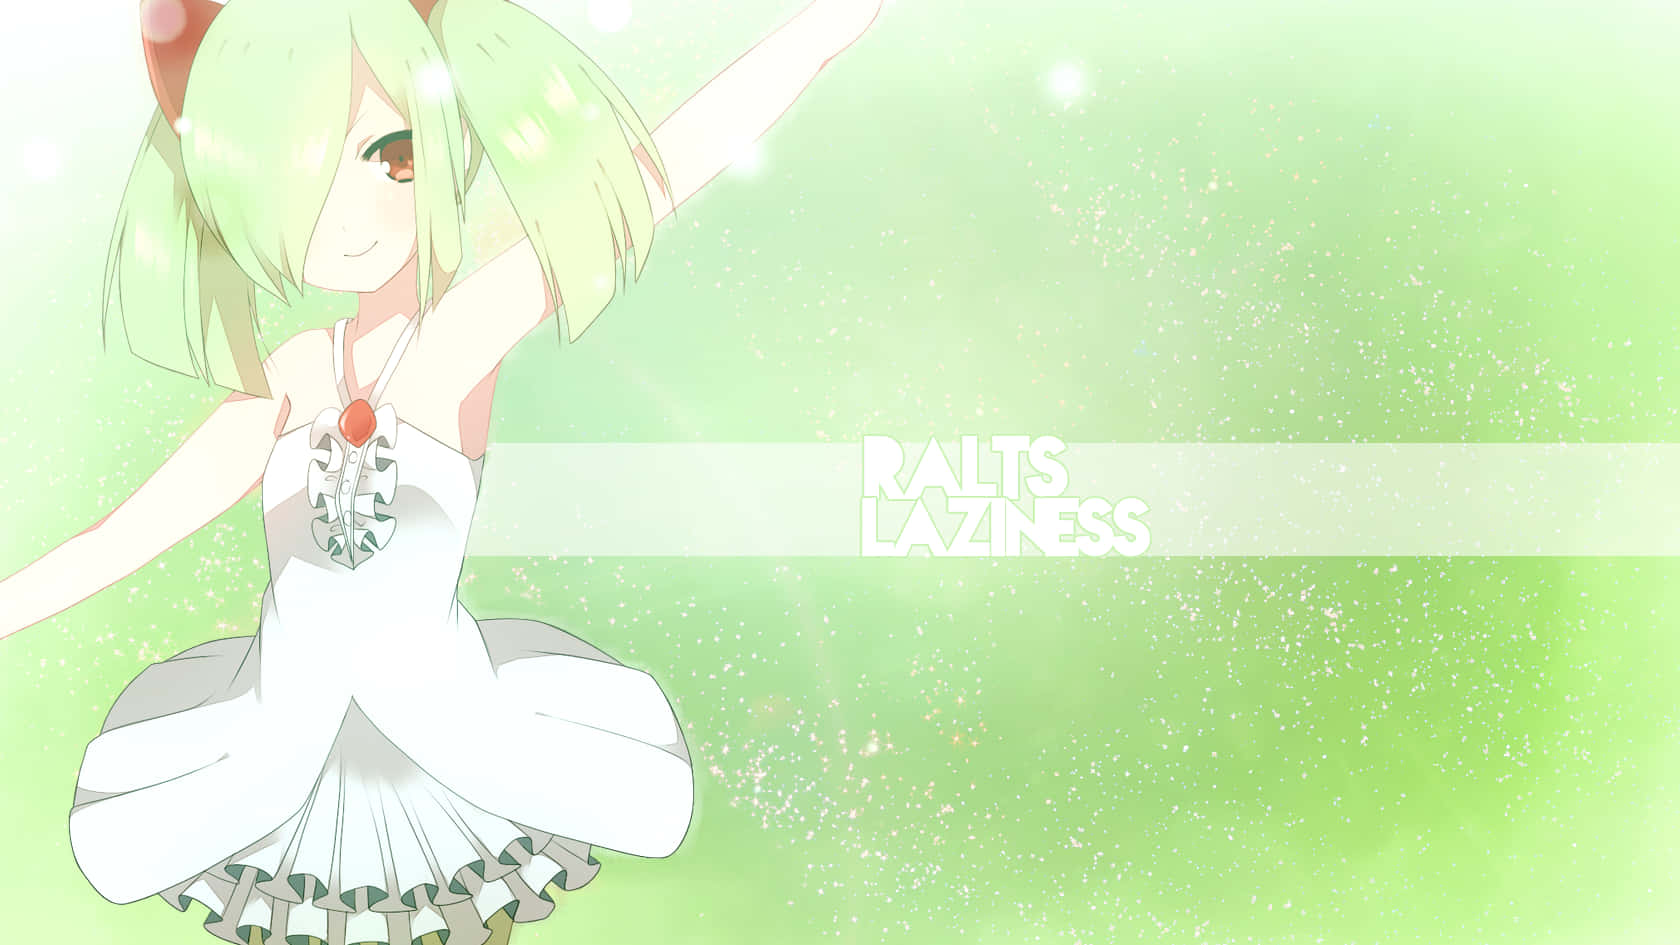 Anime Girl With Ralts Laziness Text Wallpaper